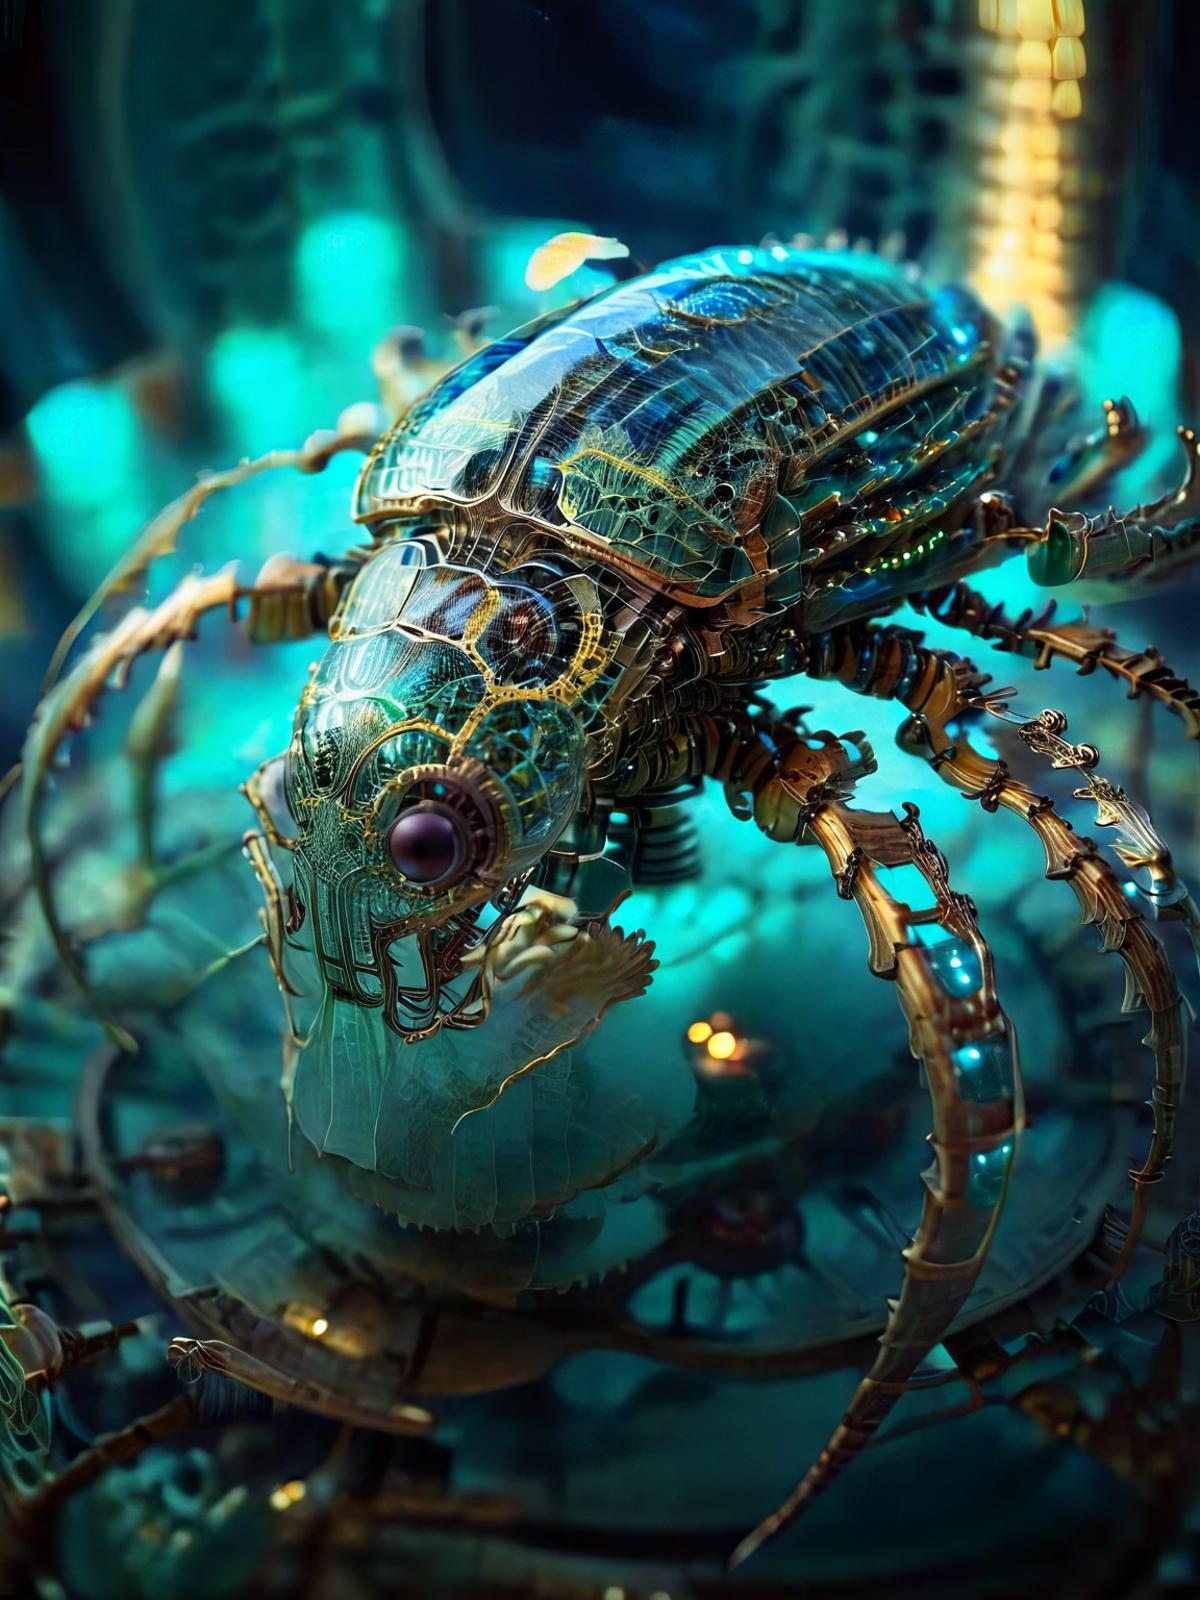 A blue and green futuristic robot insect with gears sits on top of a circular structure.